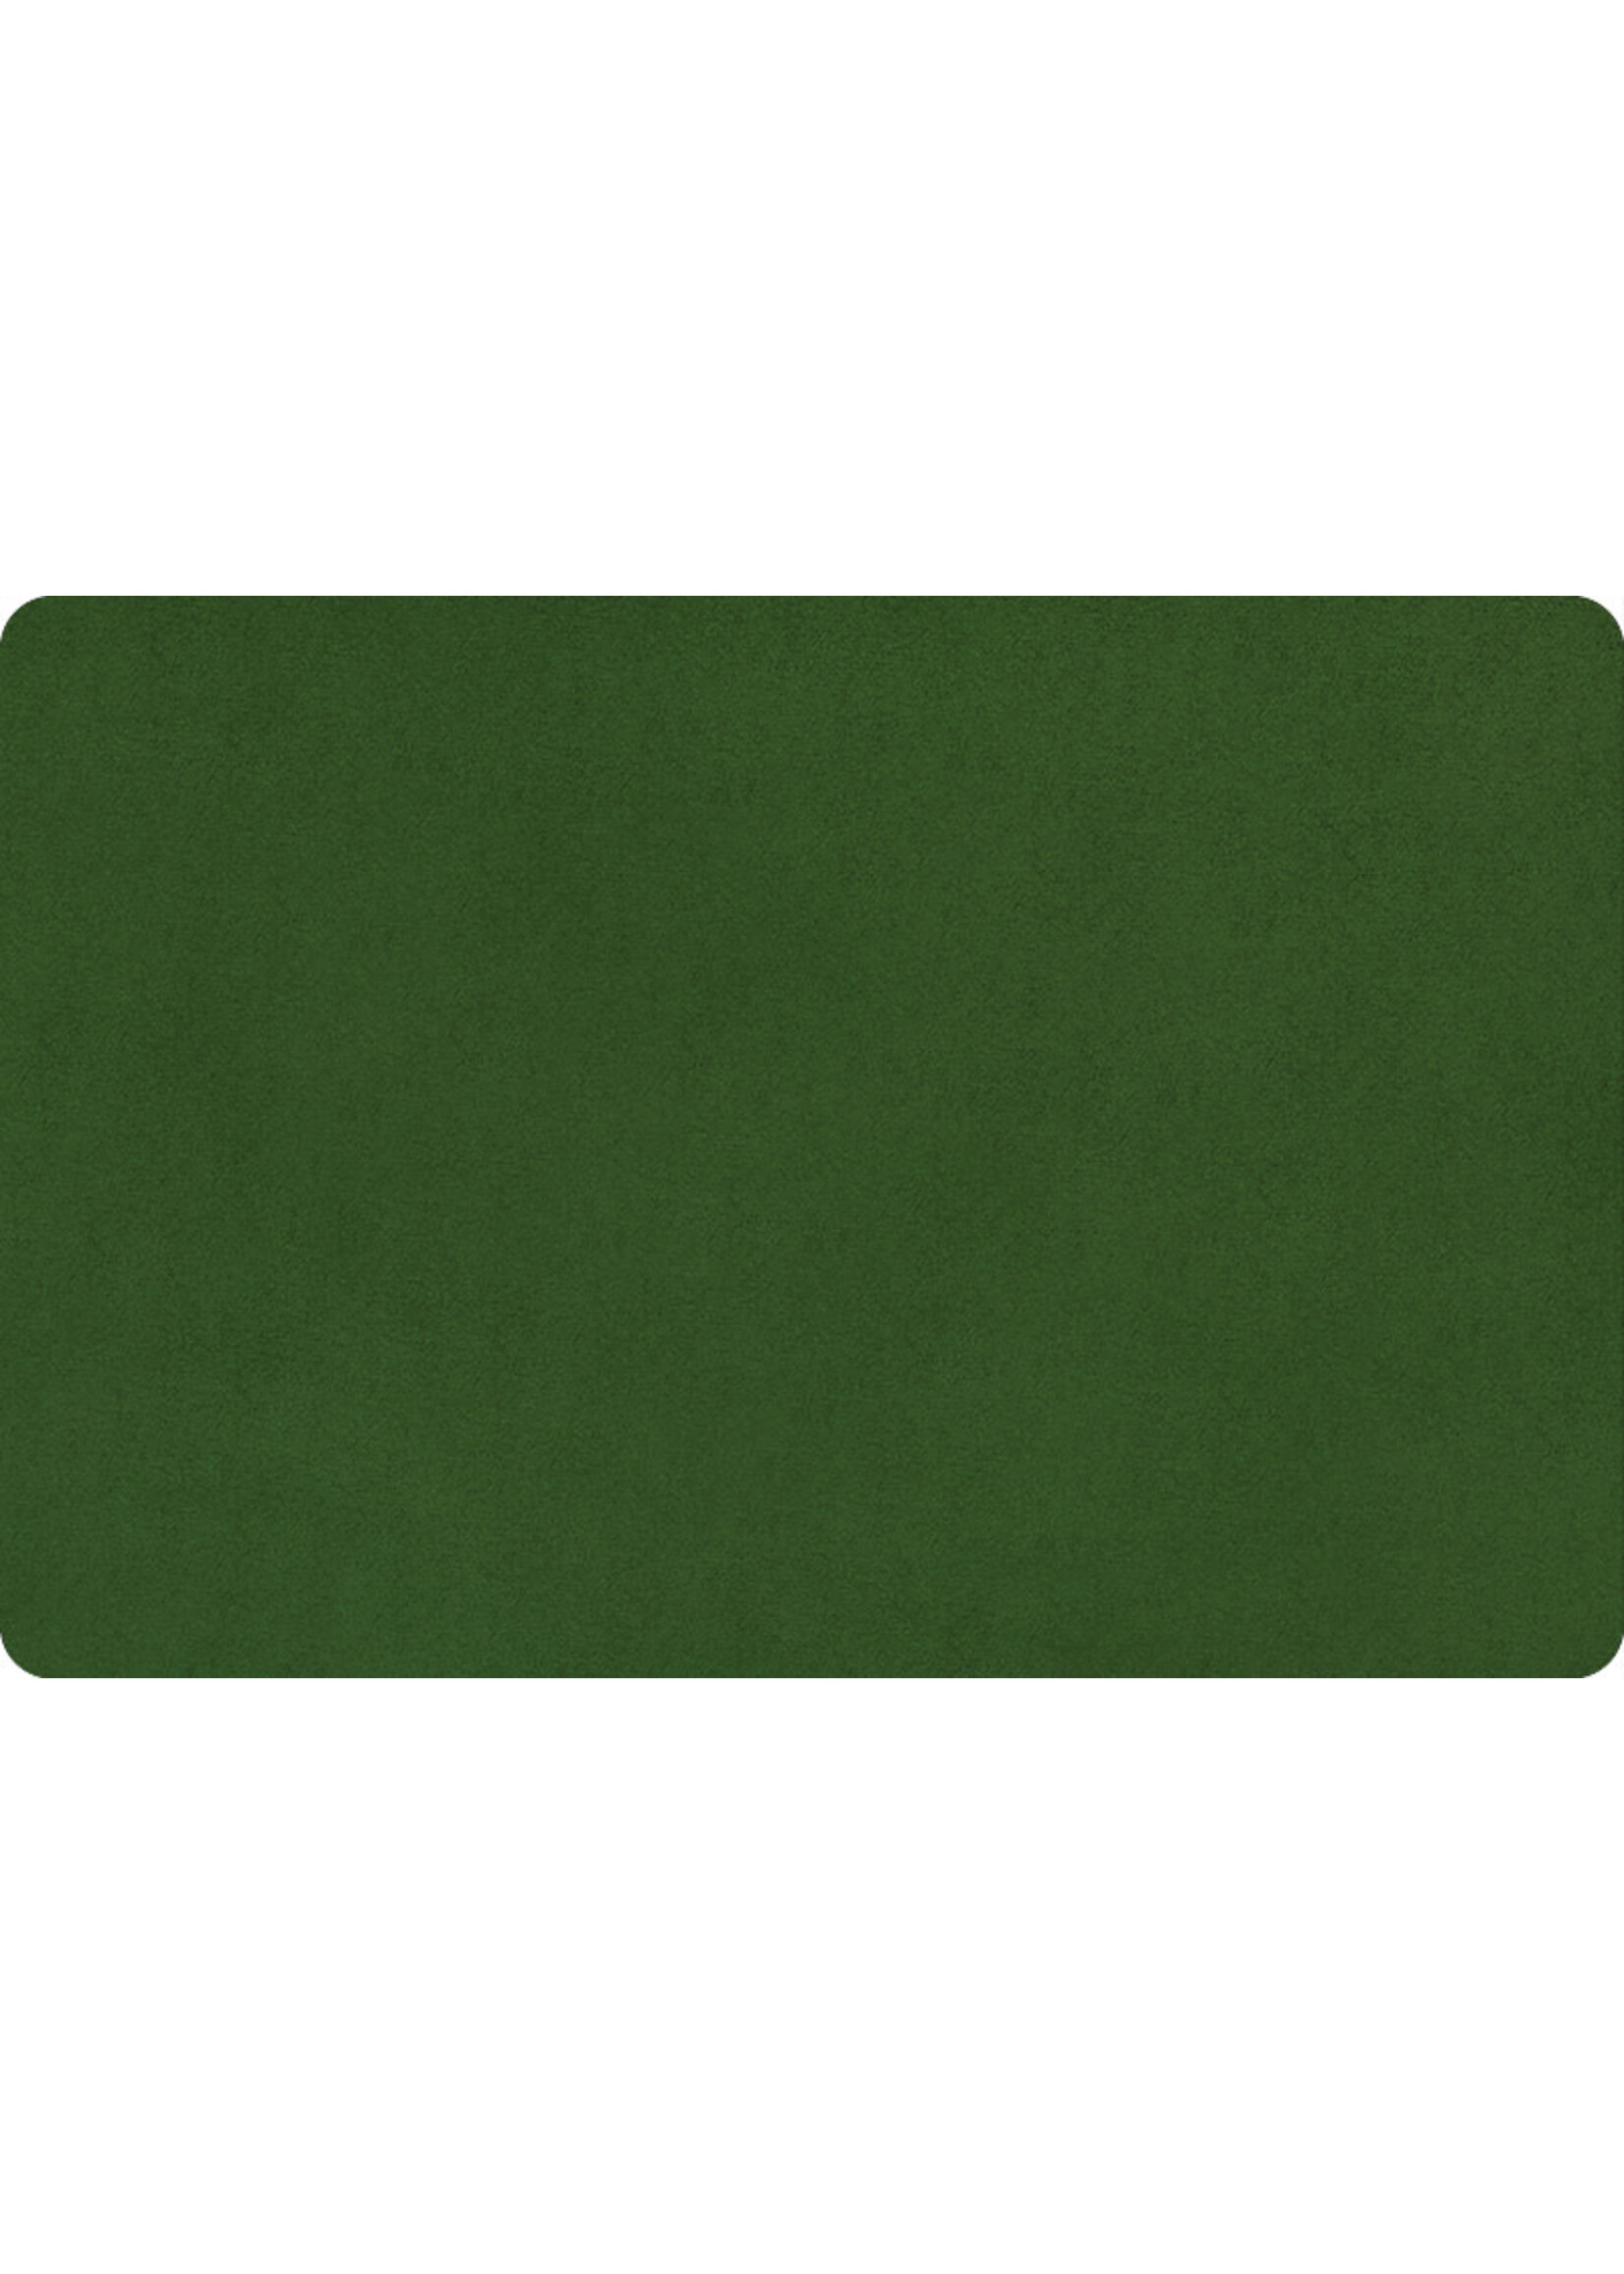 Shannon Fabrics Minky, Extra Wide Solid Cuddle3, 90" Evergreen, (by the inch)